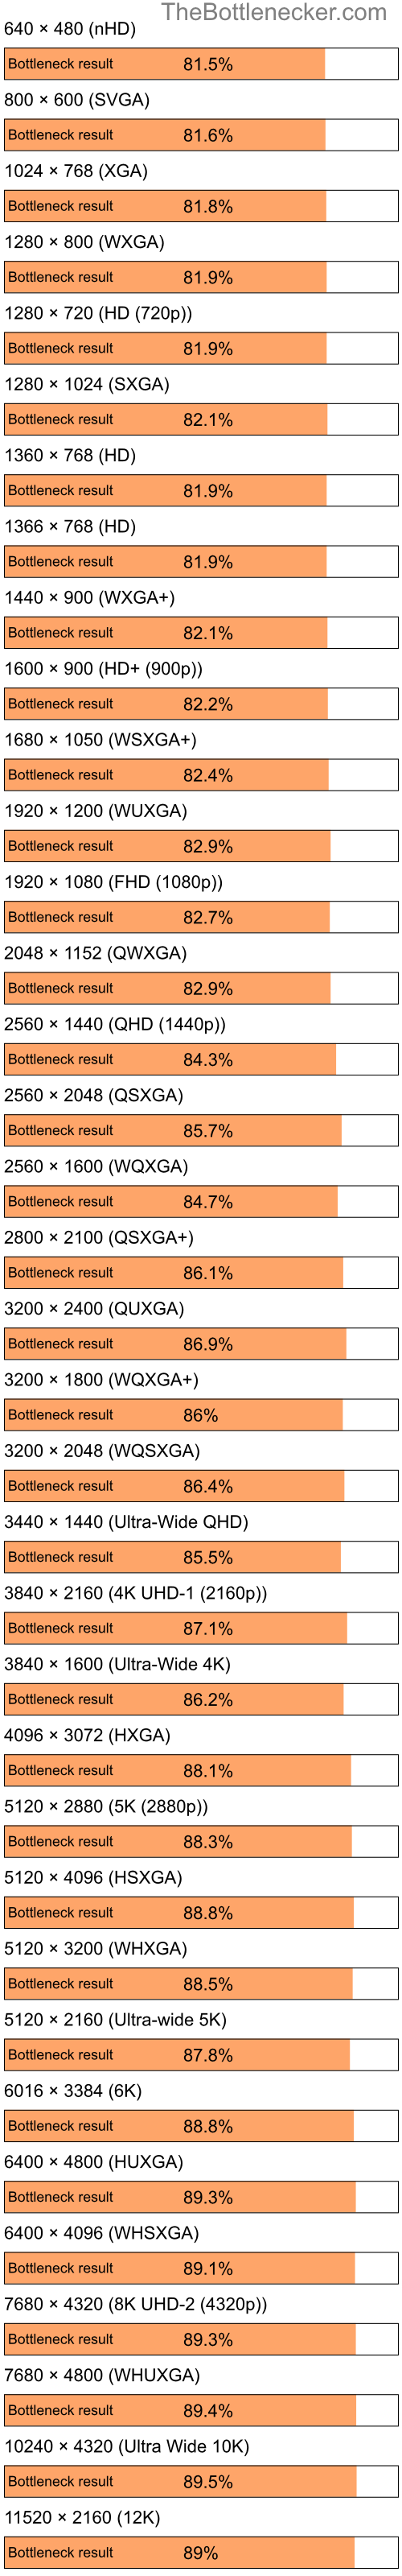 Bottleneck results by resolution for Intel Celeron M 420 and NVIDIA GeForce 7200 GS in Graphic Card Intense Tasks